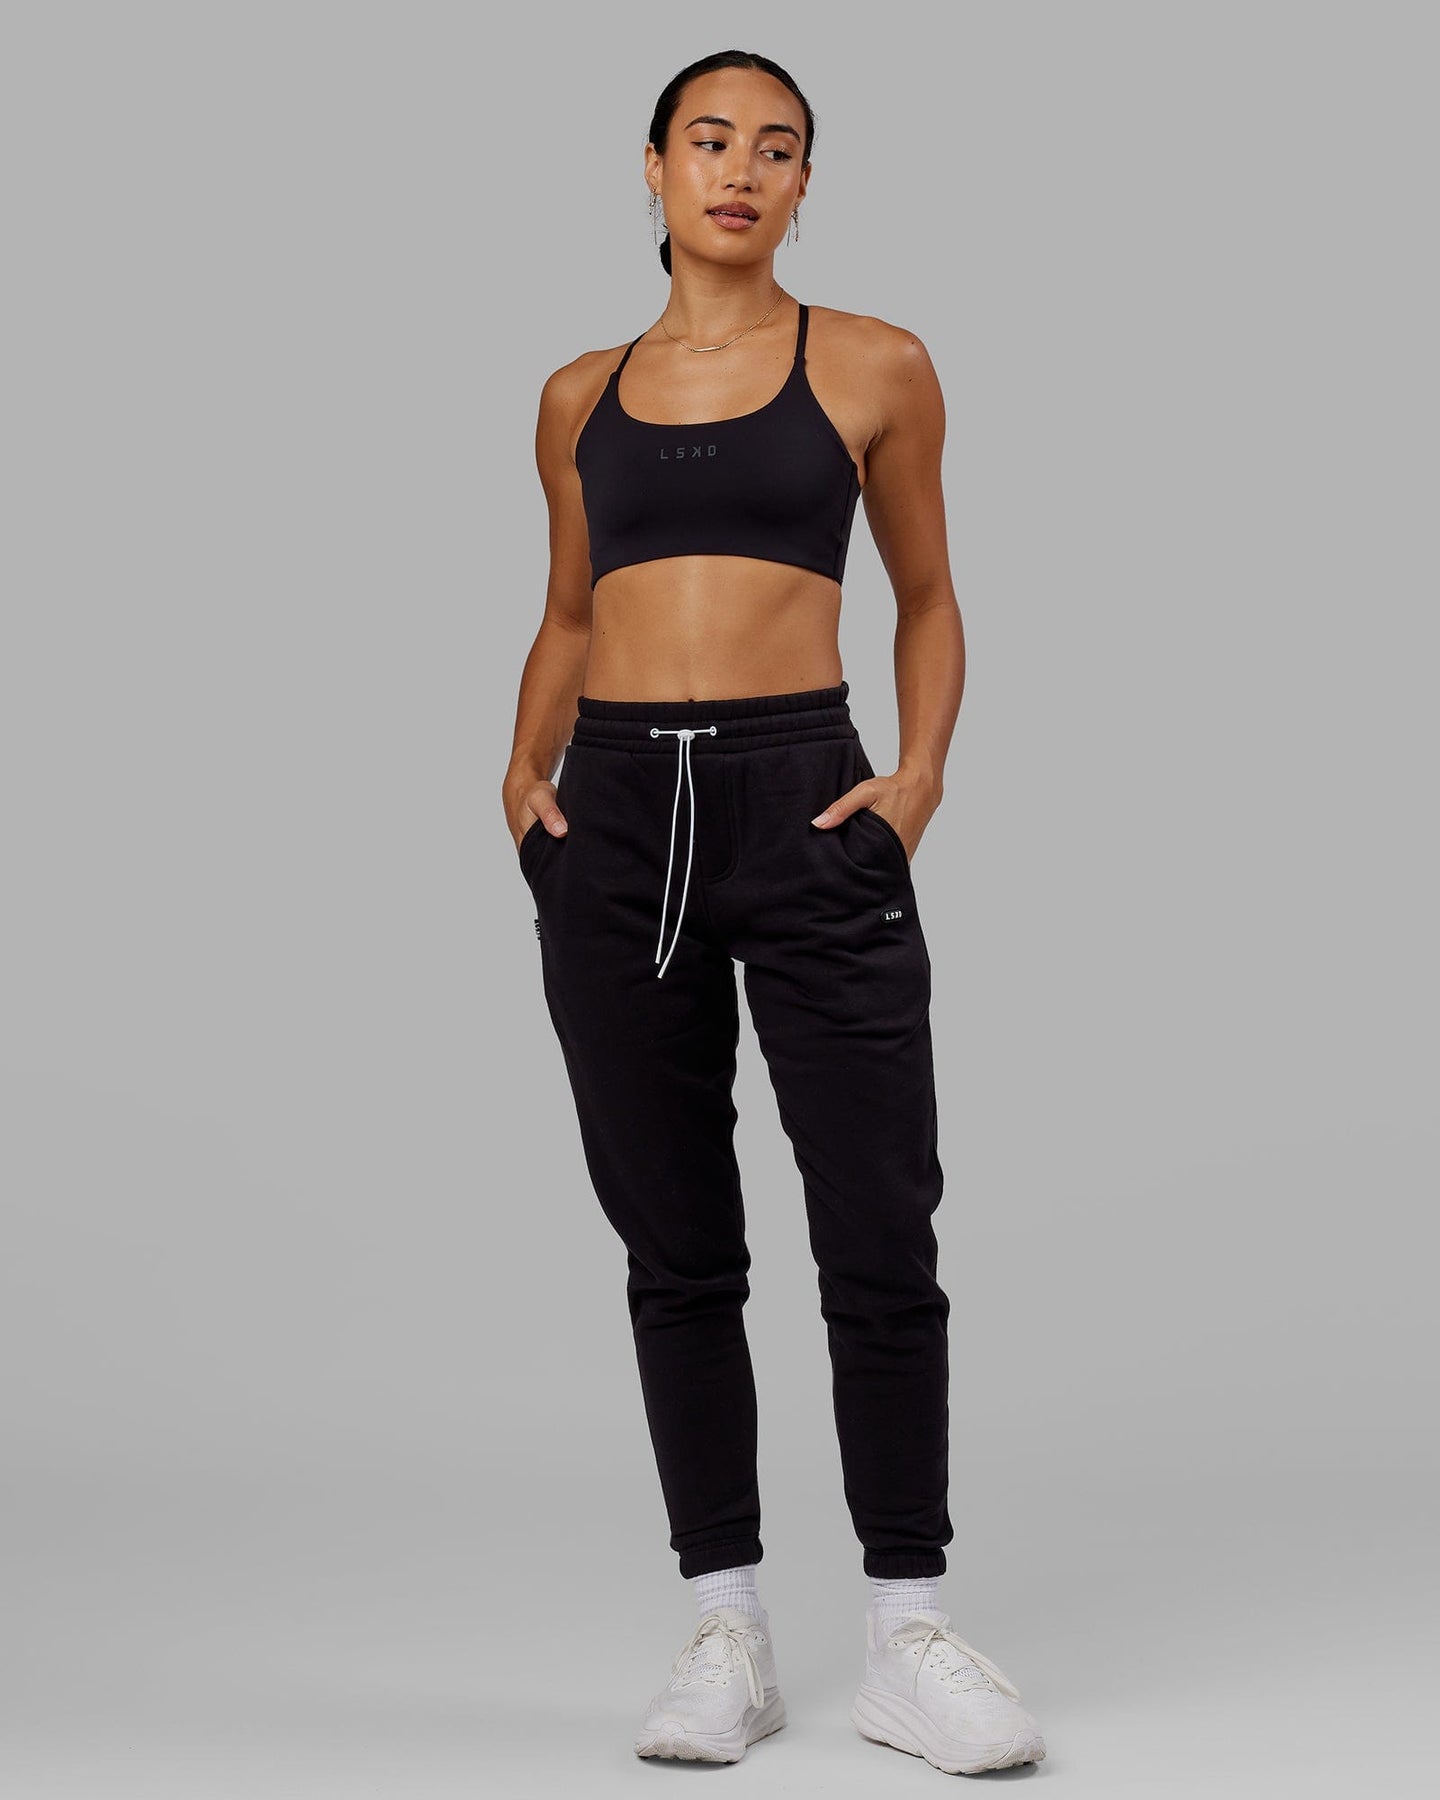 Black Track pants and sweatpants for Women | Lyst